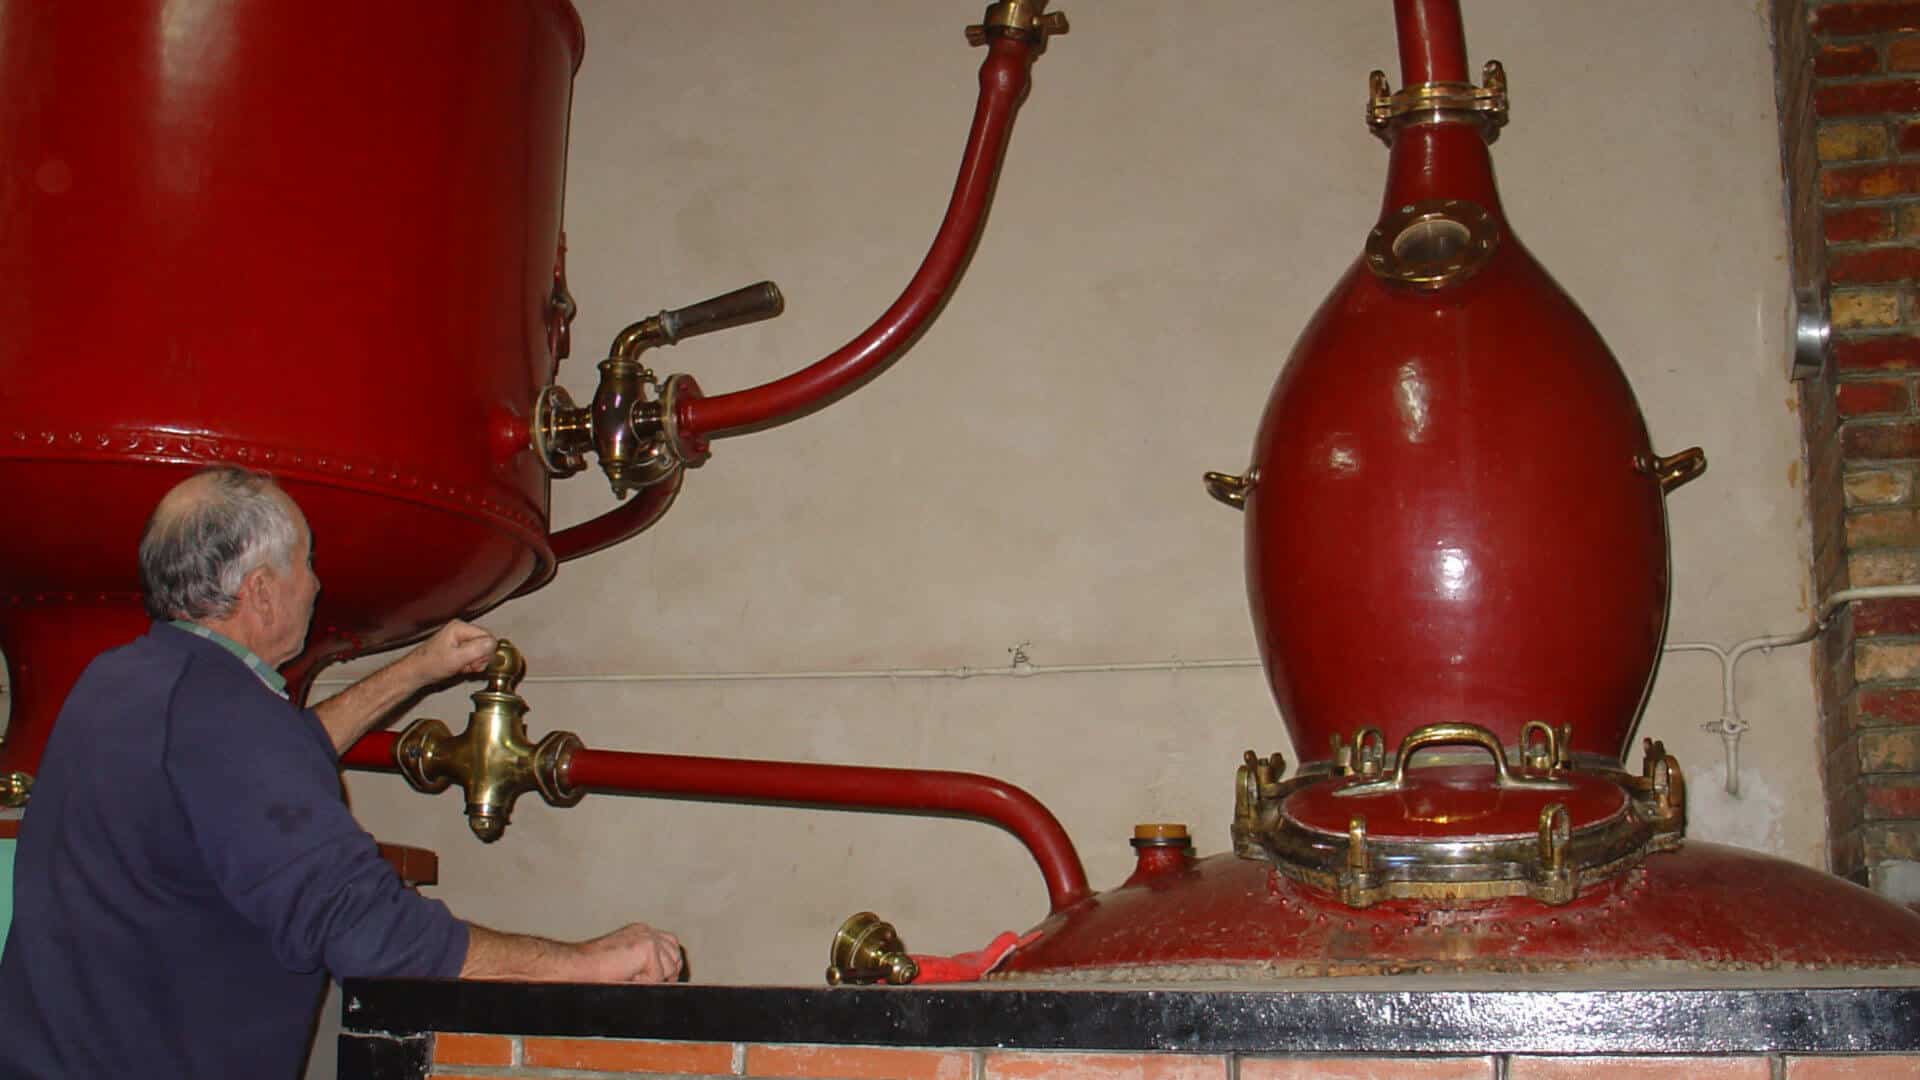 A distiller facing his traditional still with an olive shape head capital for distilling cognac